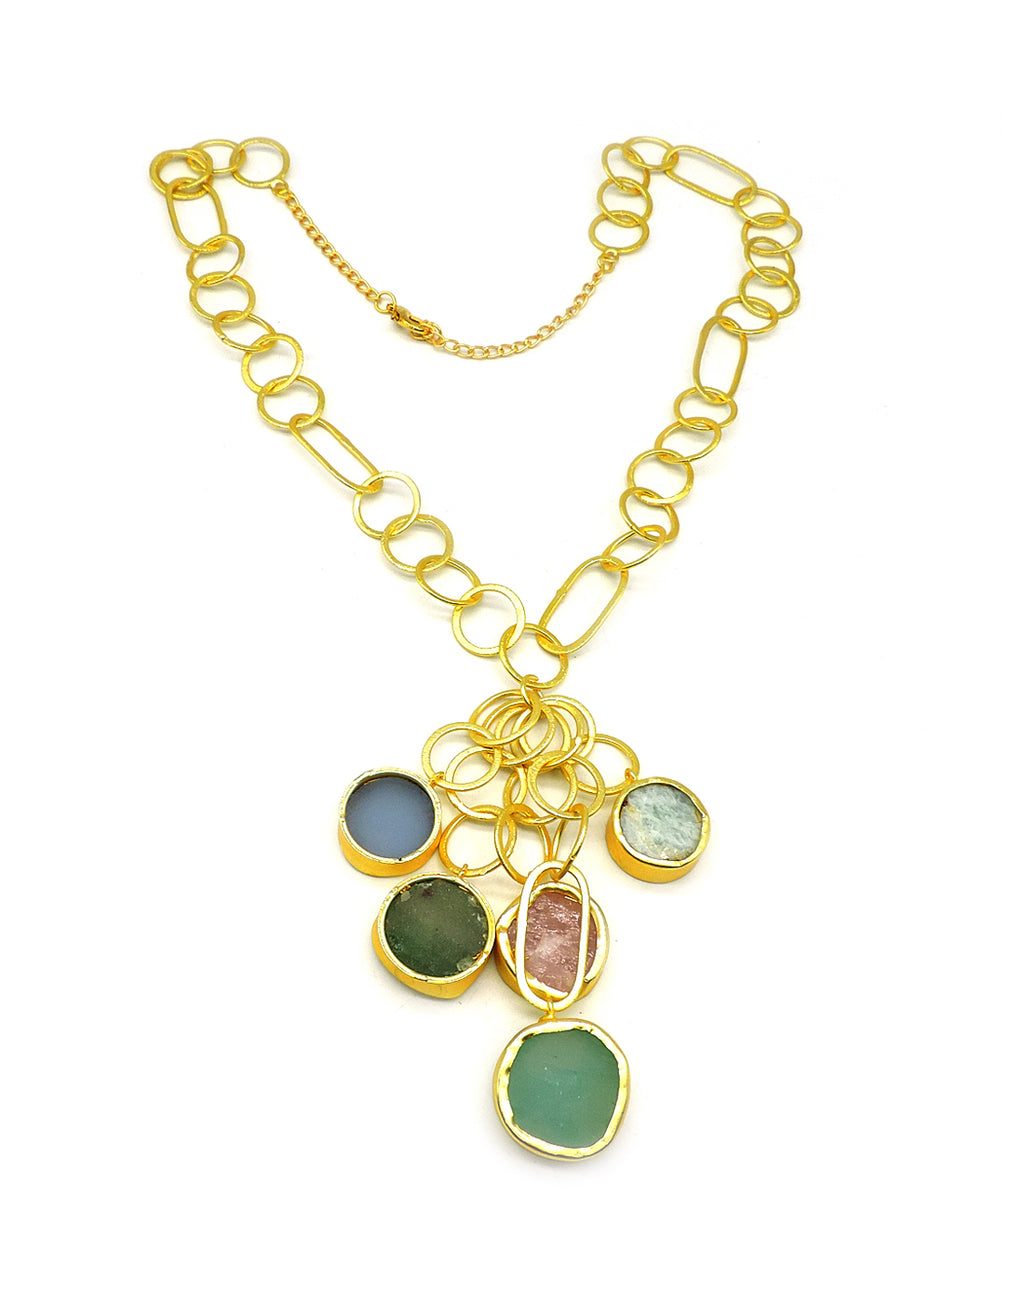 Jewelled Chain Necklace - Statement Necklaces - Gold-Plated & Hypoallergenic Jewellery - Made in India - Dubai Jewellery - Dori